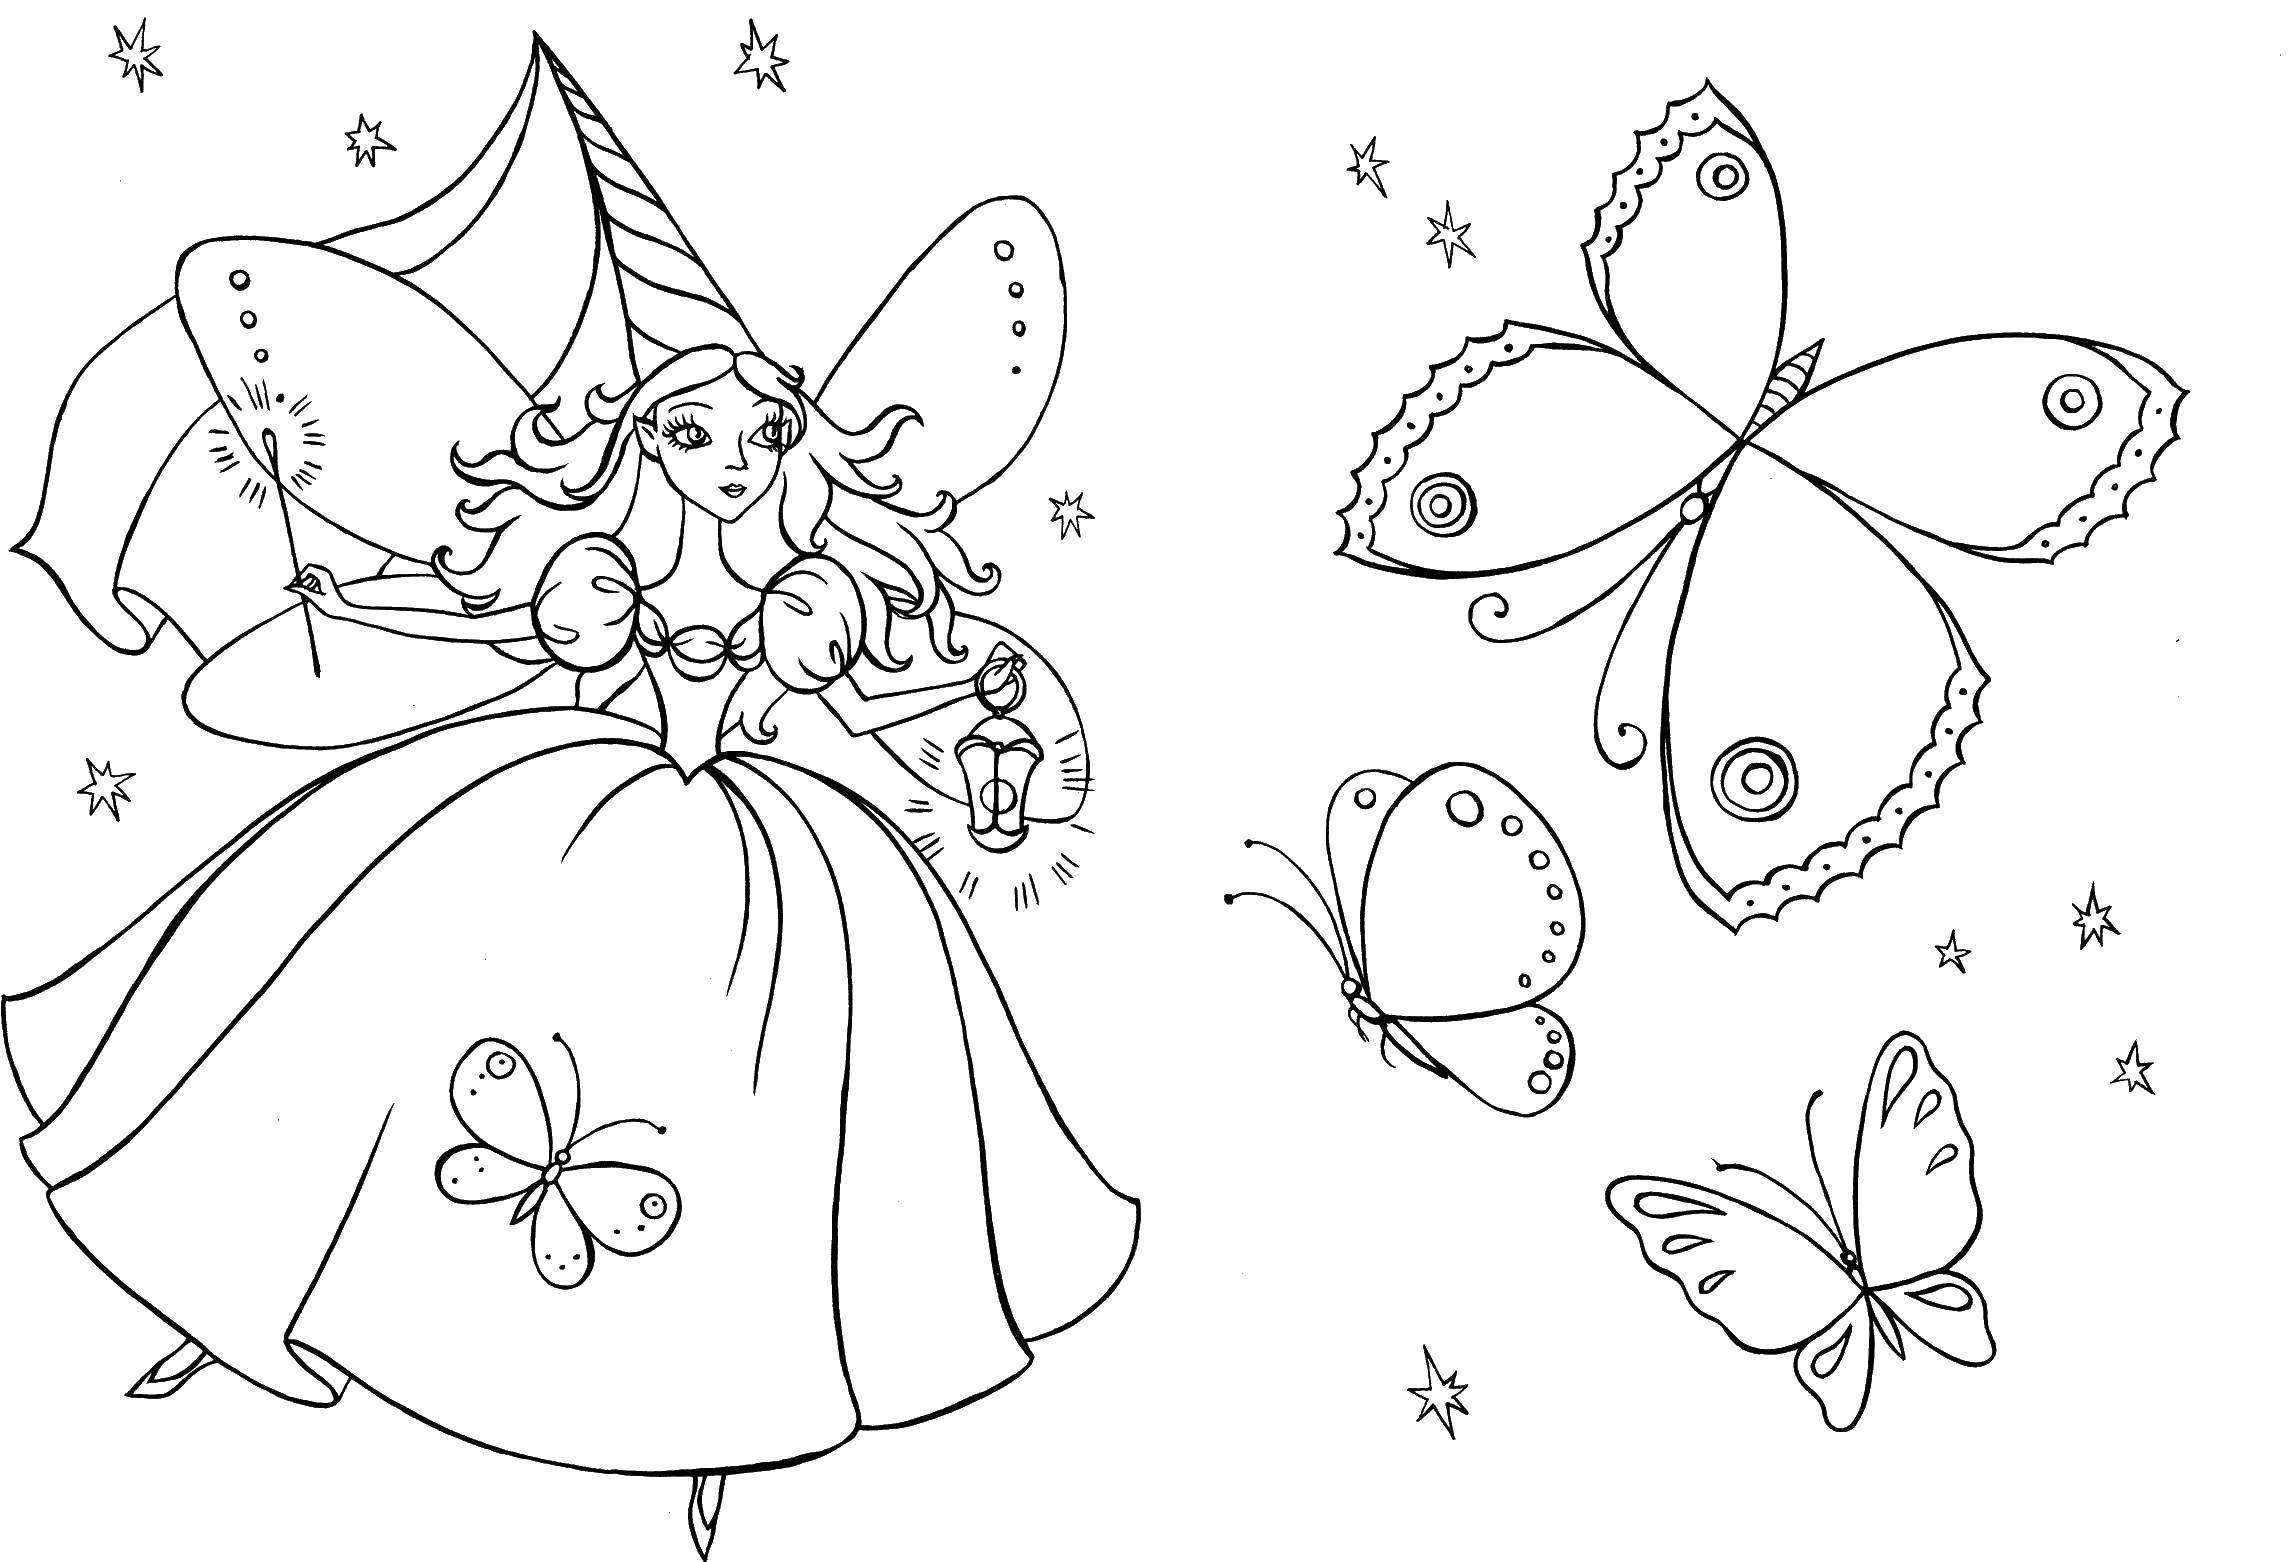 Coloring Fairy and butterfly. Category fairies. Tags:  fairy, butterfly.